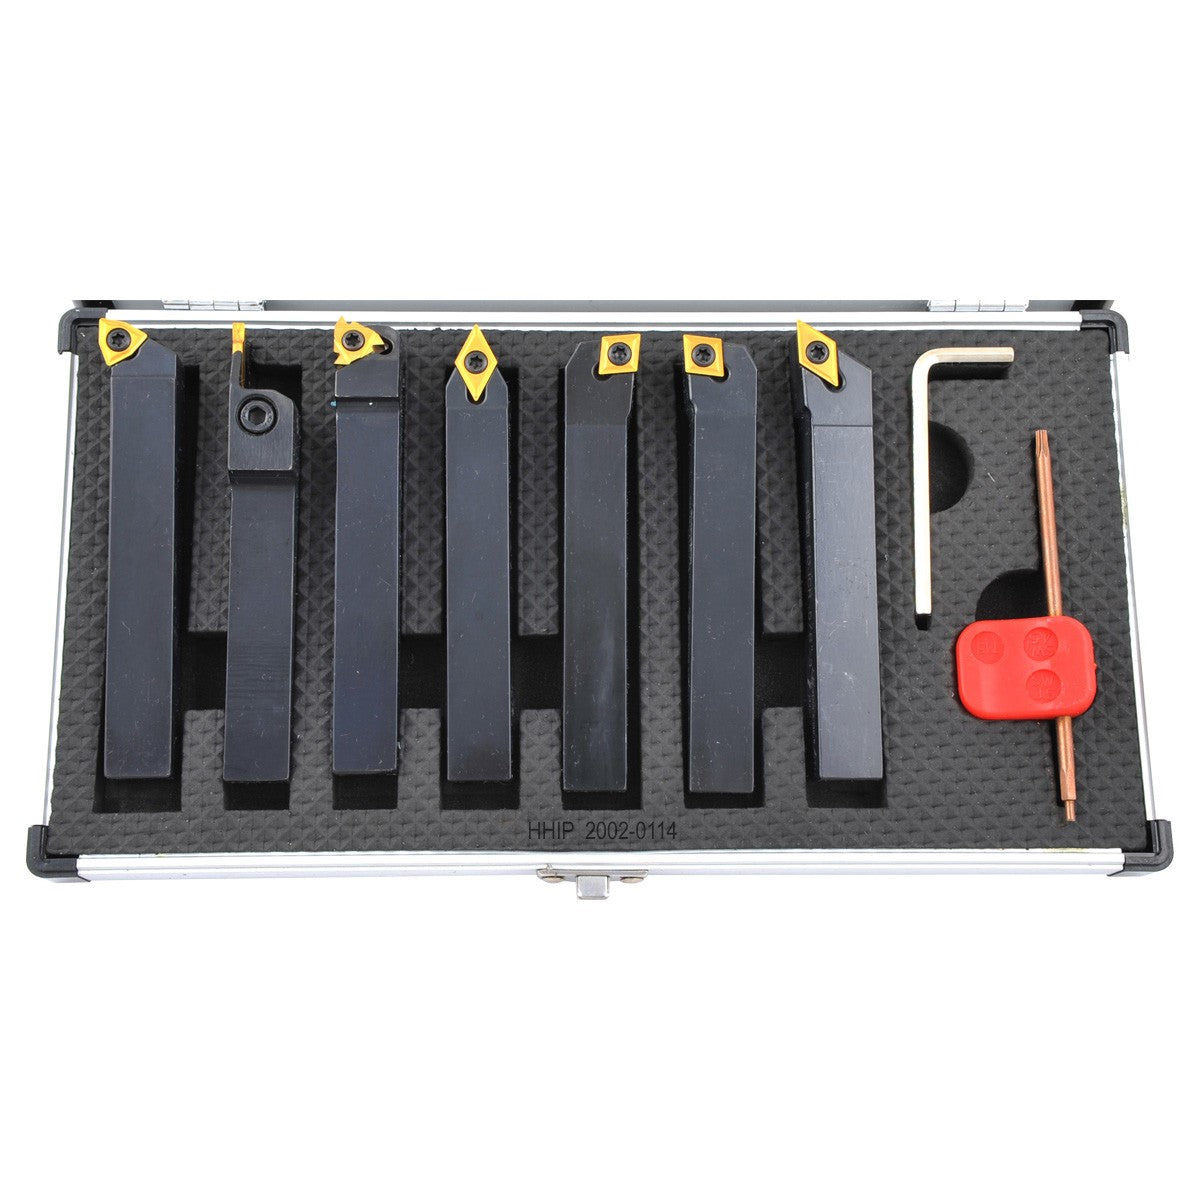 PRO-SERIES 7 PIECE 5/8 INDEXABLE CUT OFF & TURNING TOOL SET